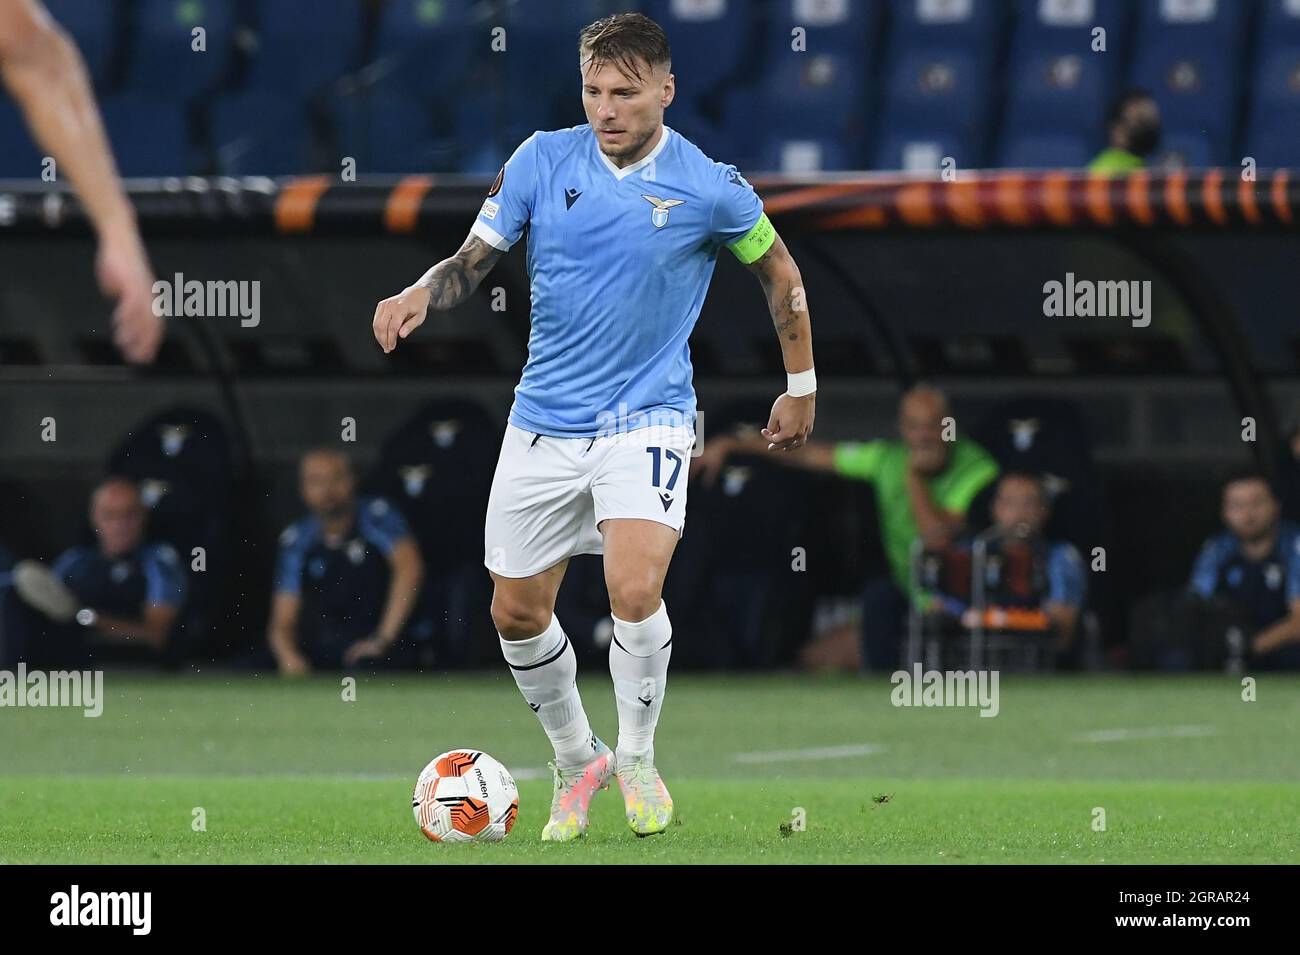 Rome, Lazio. 30th Sep, 2021. Ciro Immobile of SS Lazio during the Europa League match between SS Lazio v Lokomotiv Moscow at Olimpico stadium in Rome, Italy, September 30, 2021. Fotografo01 Credit: Independent Photo Agency/Alamy Live News Stock Photo